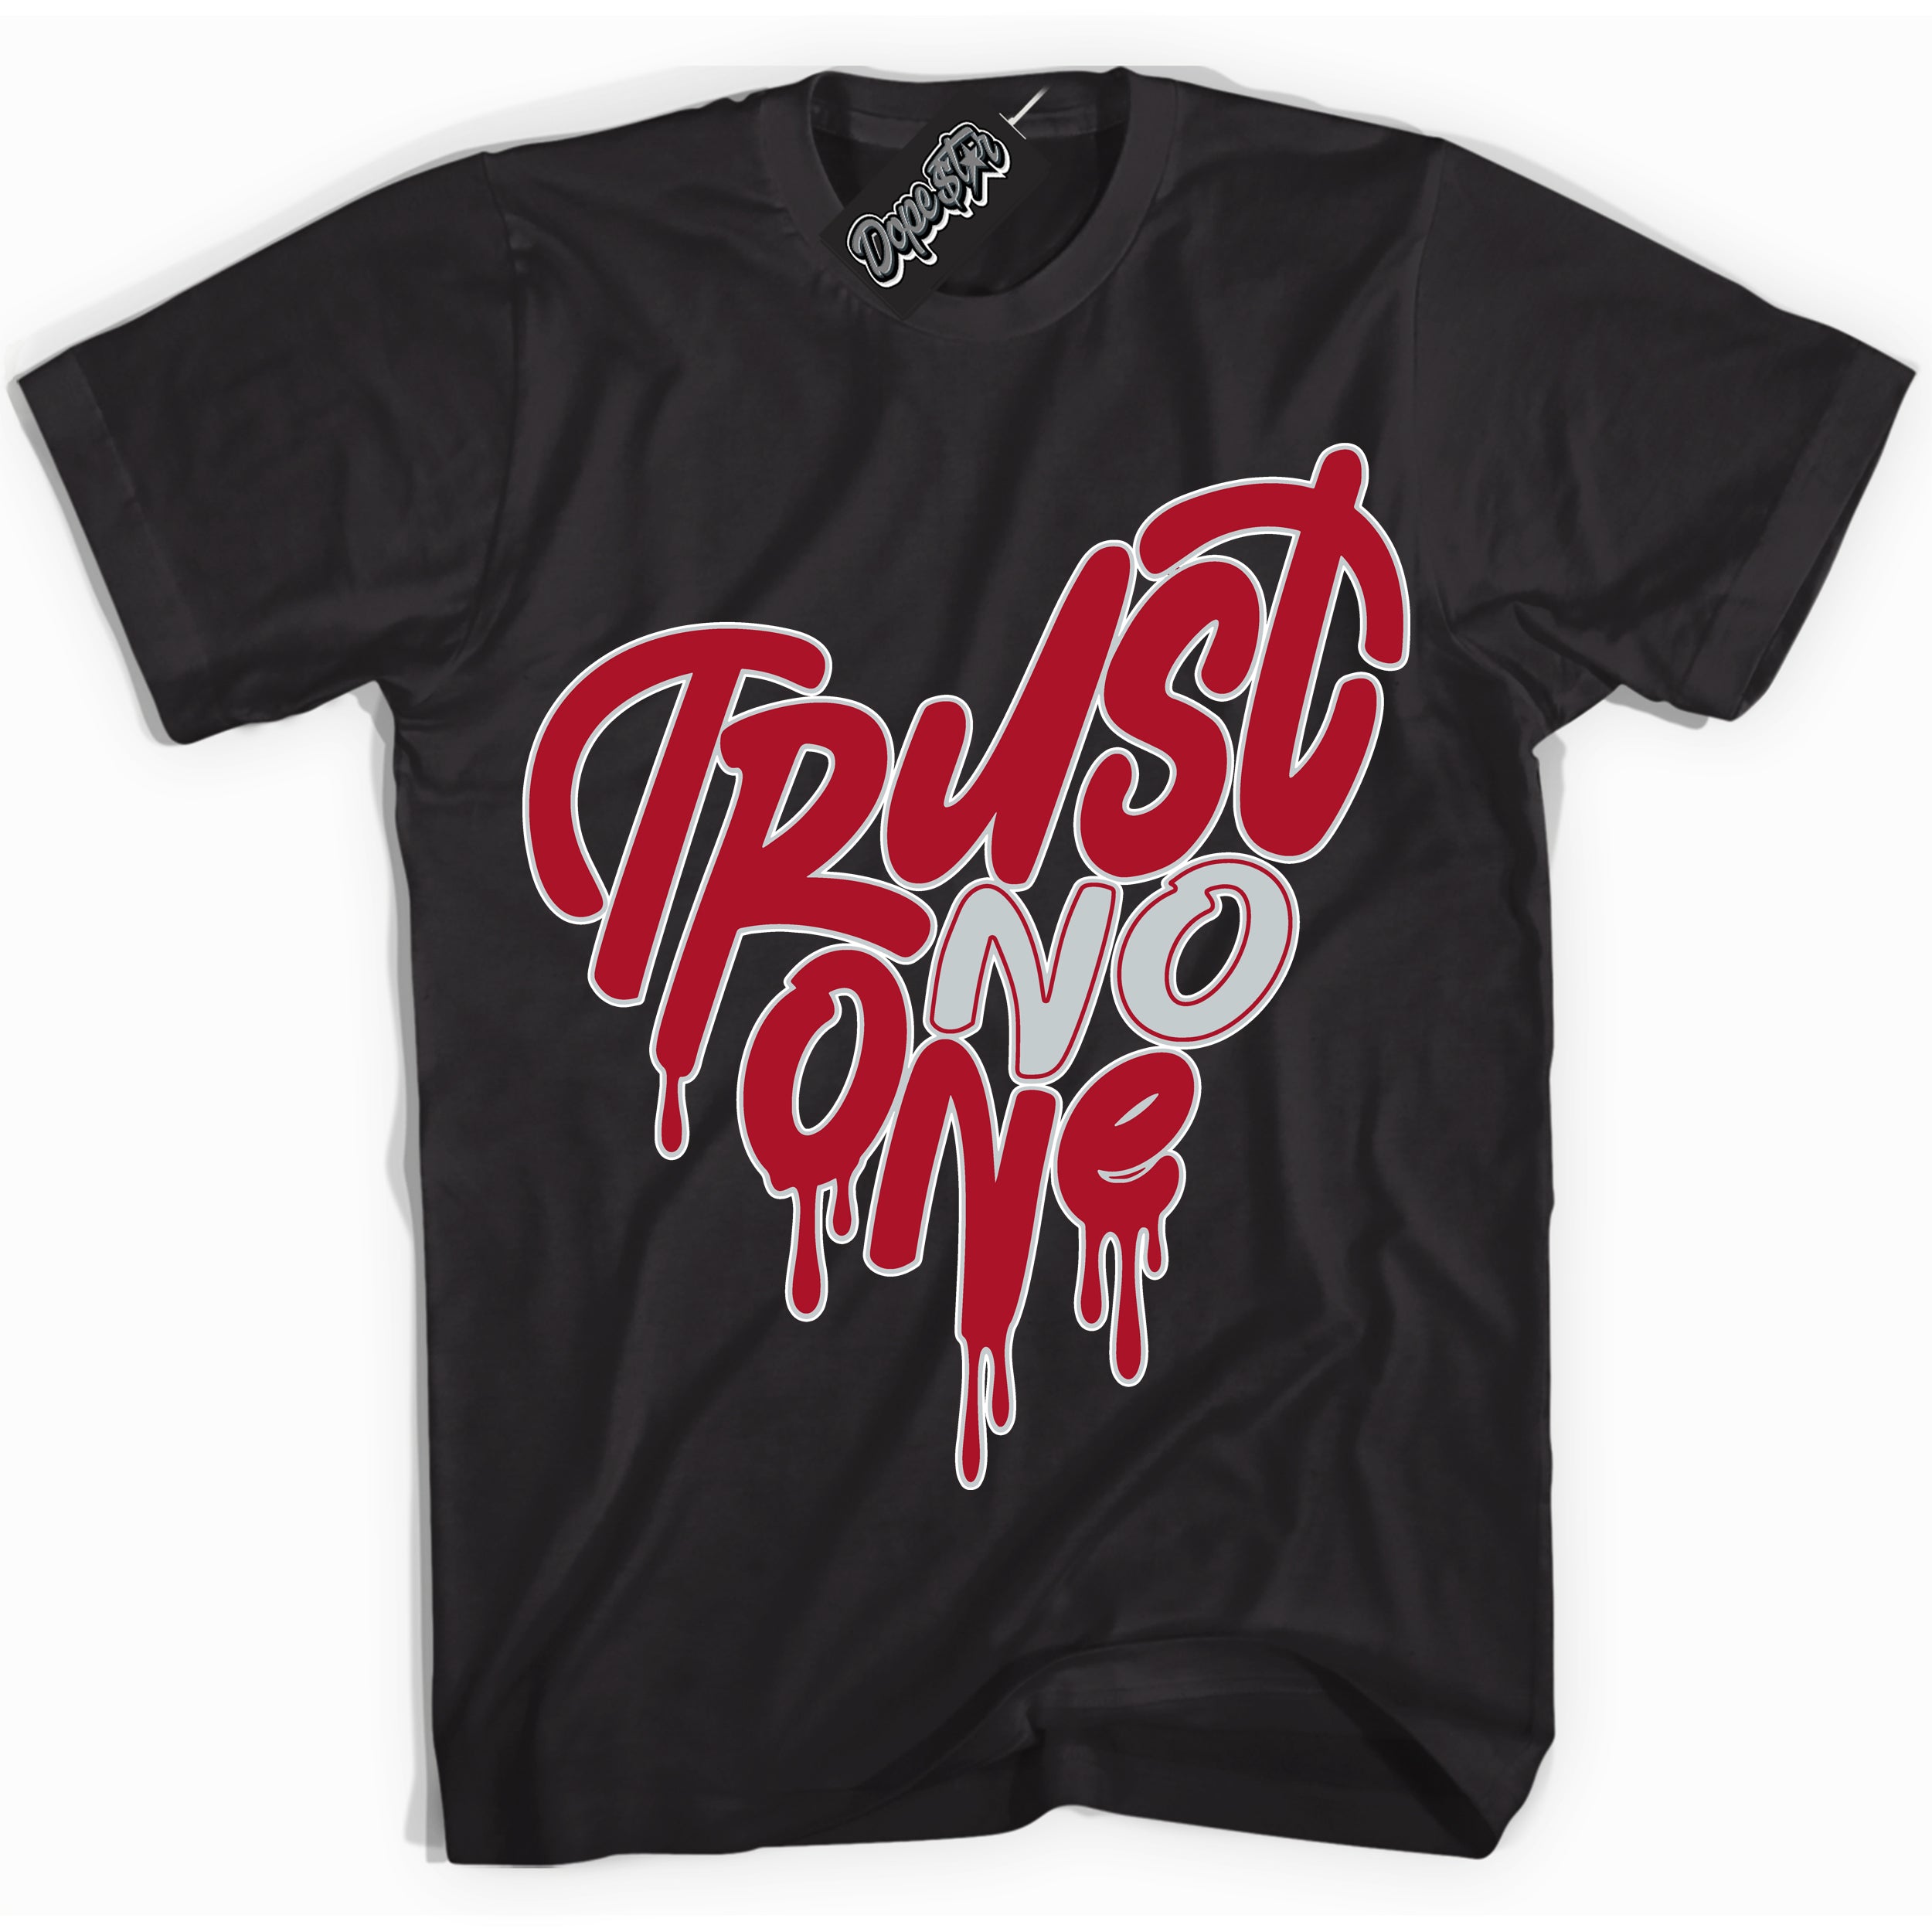 Cool Black Shirt with “ Trust No One Heart” design that perfectly matches Reverse Ultraman Sneakers.